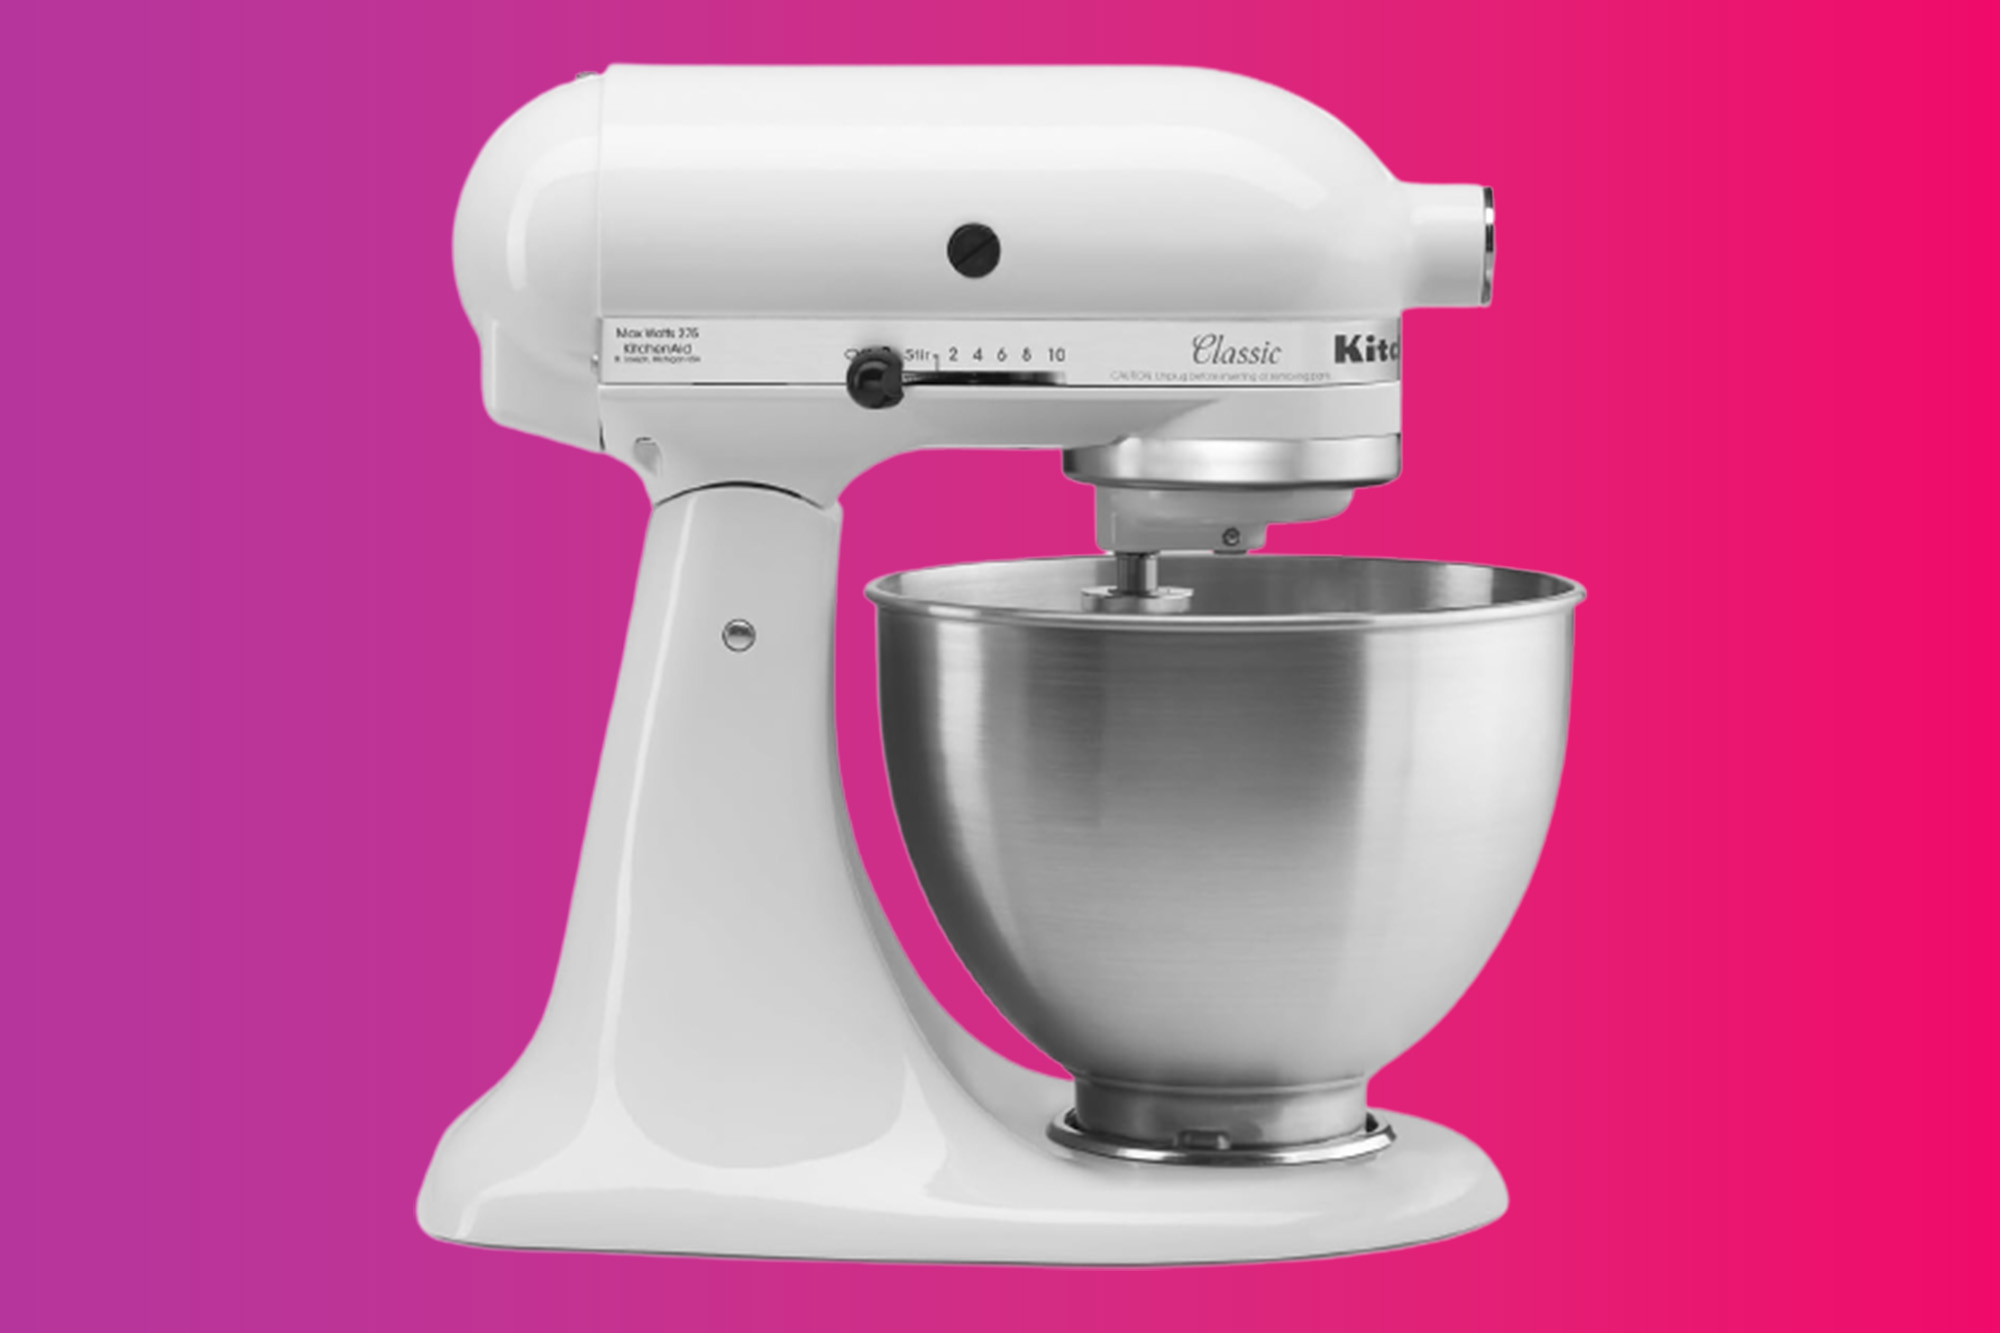 Save 15% on a KitchenAid stand mixer at Amazon for fall baking and cooking